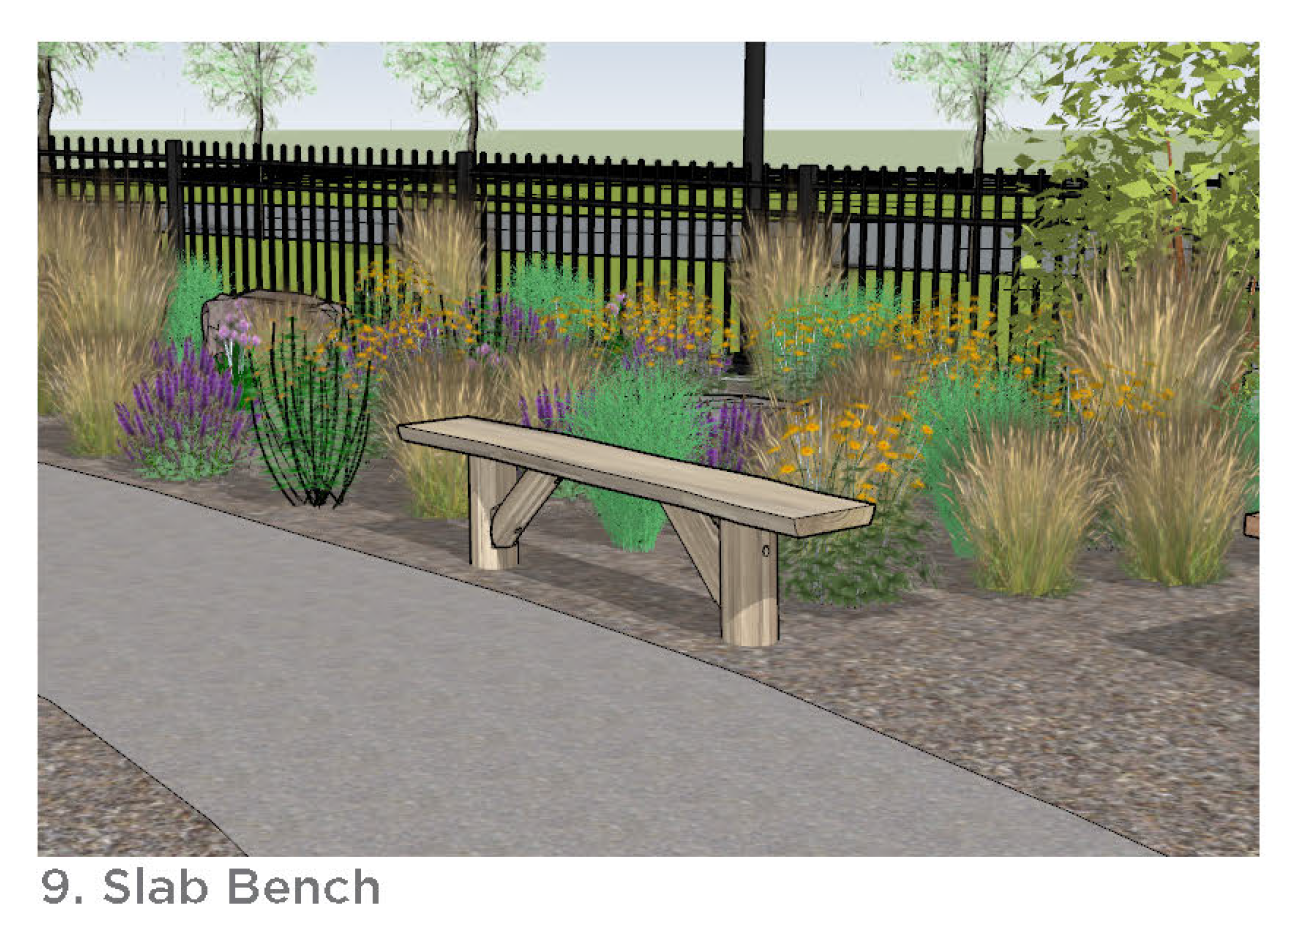 Photo of the slab bench.